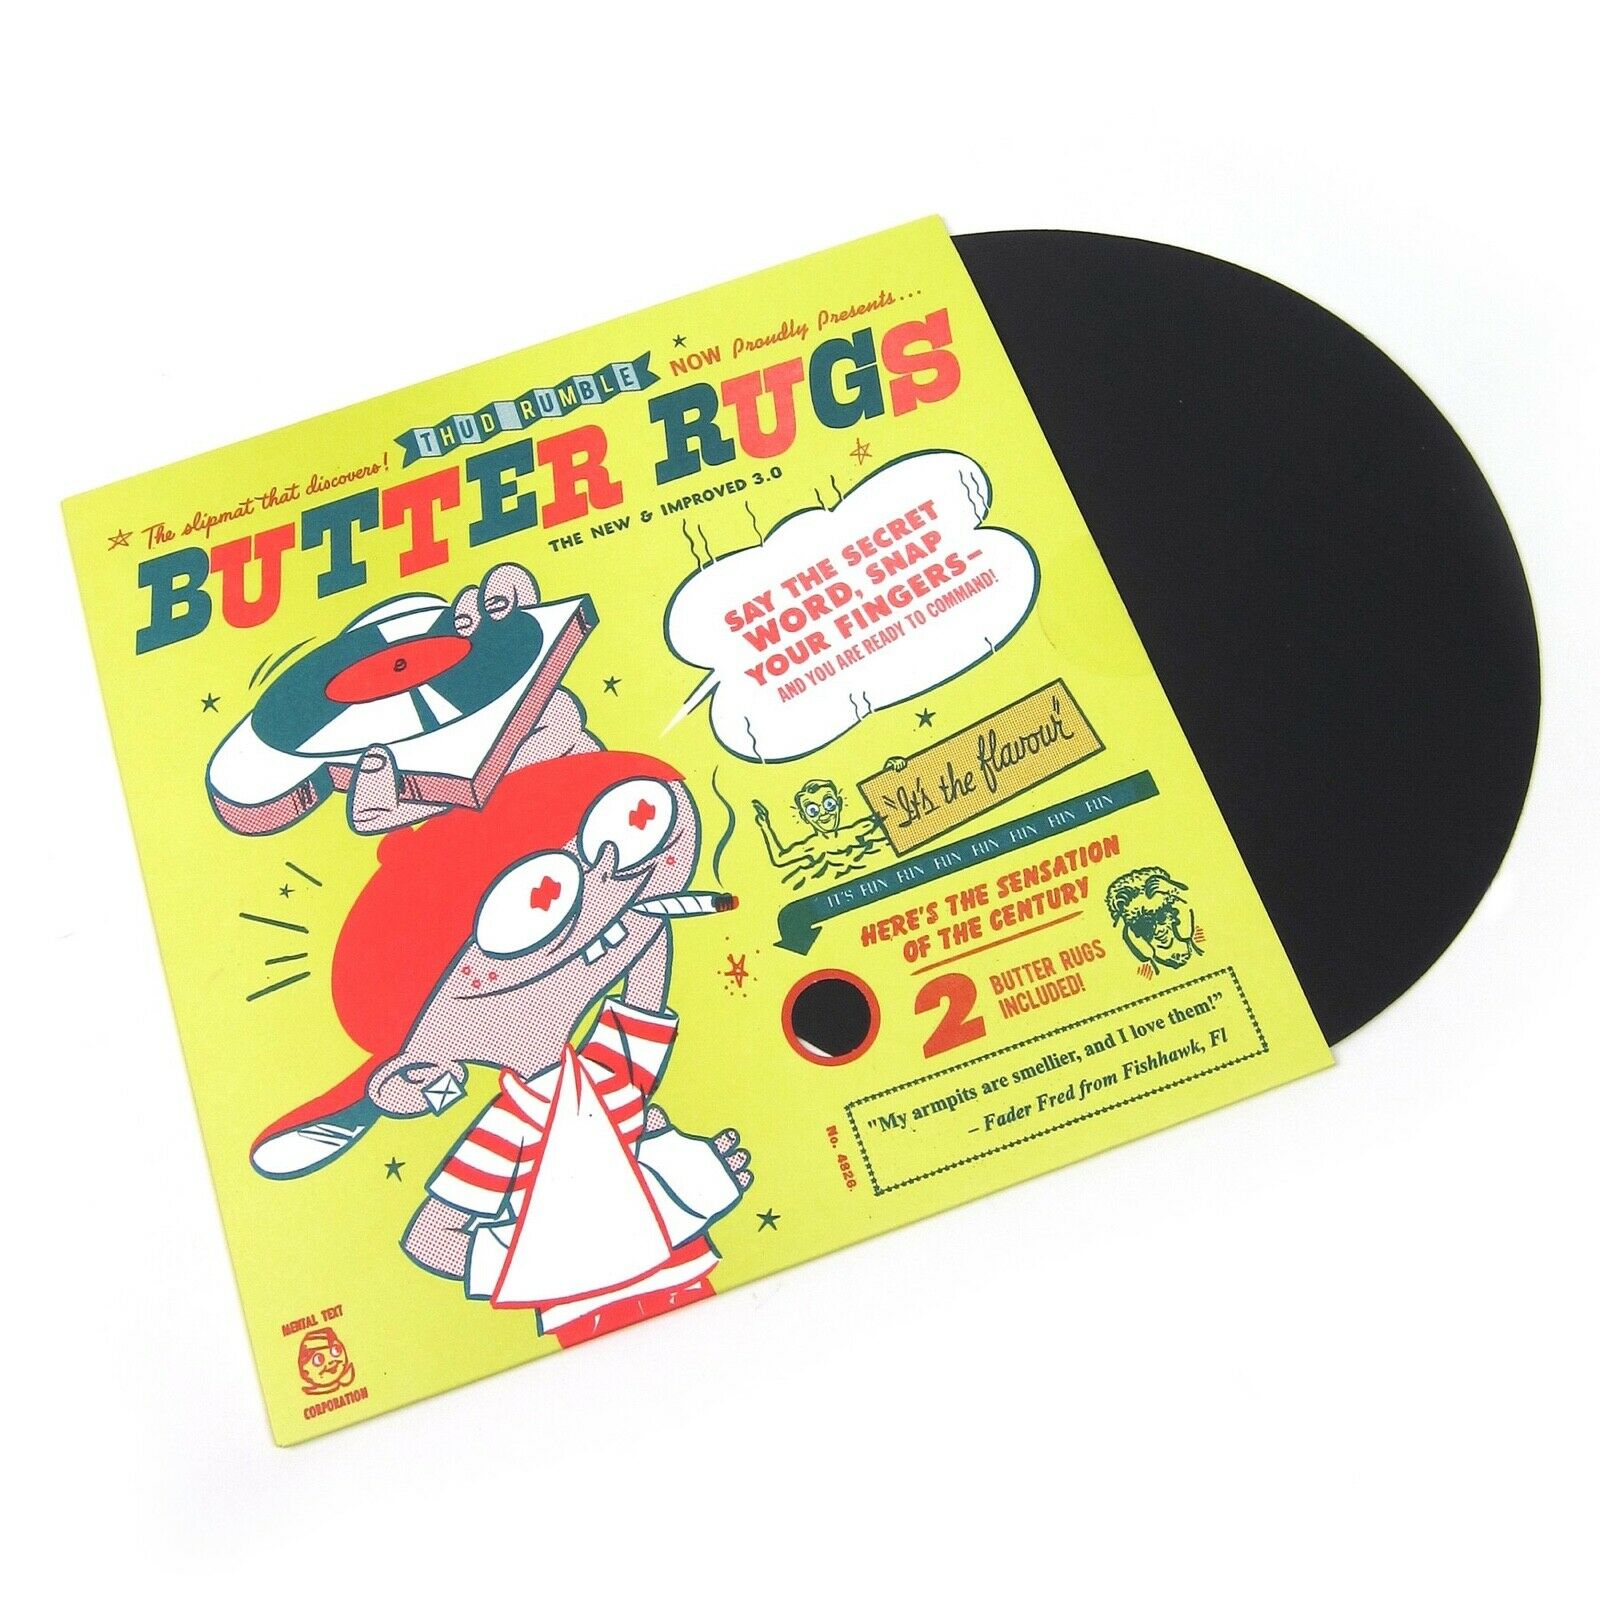 Butter Rugs - Black 12" Slipmats Pair! Thud Rumble 3.0 New!